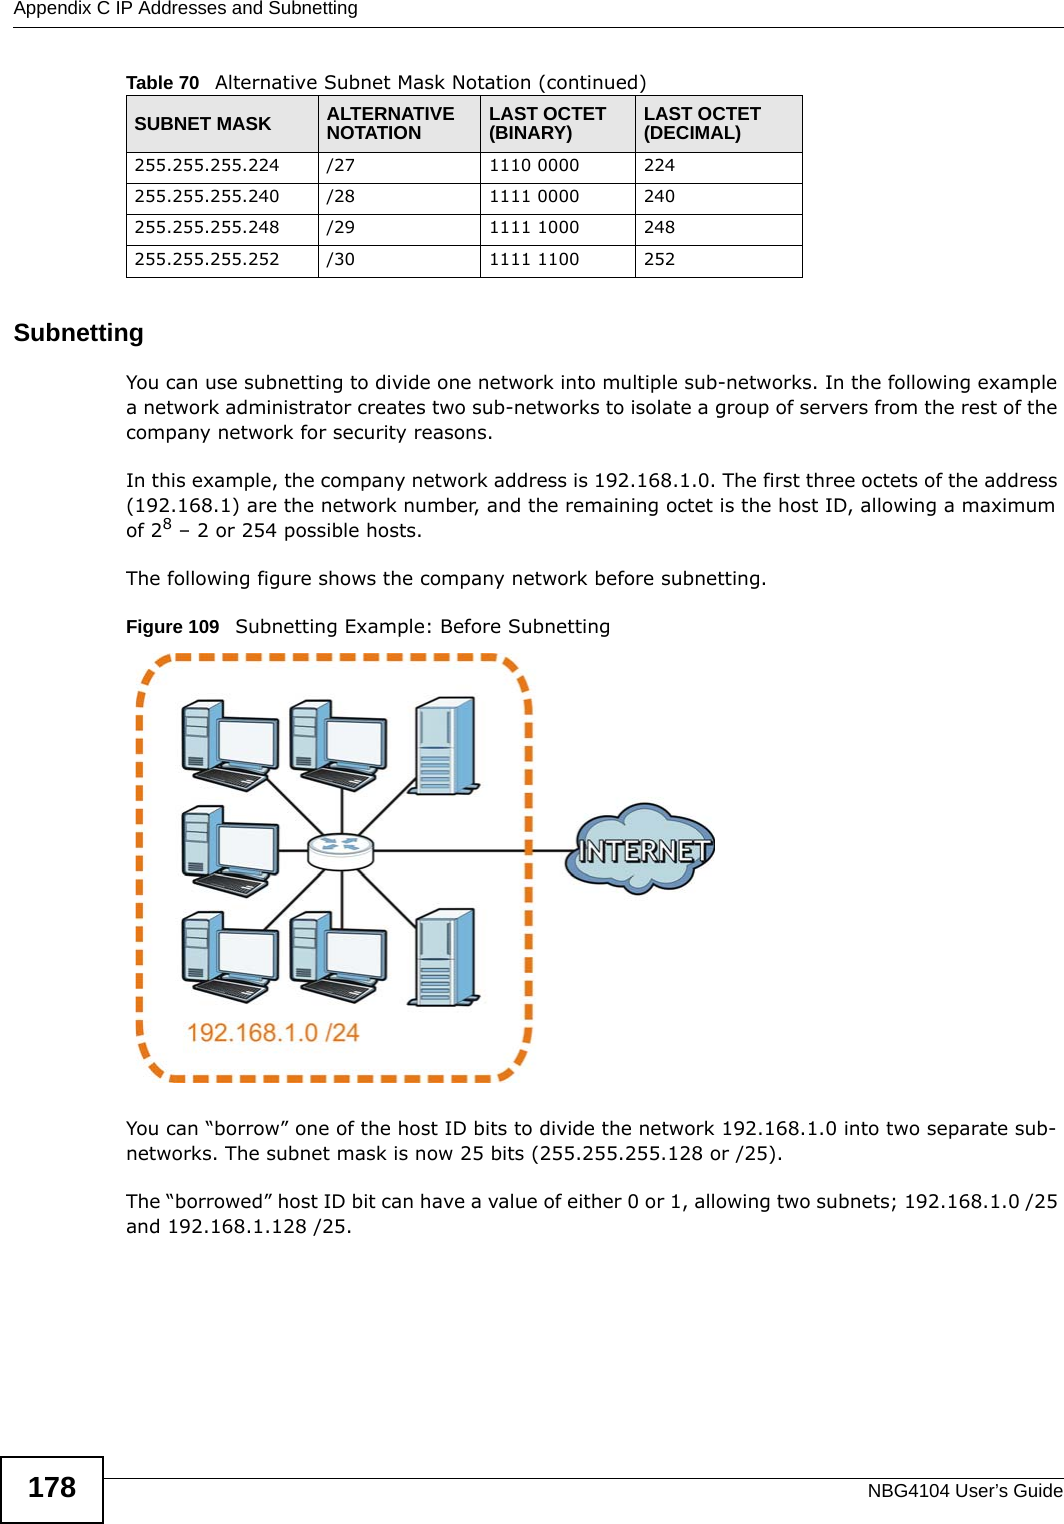 Appendix C IP Addresses and SubnettingNBG4104 User’s Guide178SubnettingYou can use subnetting to divide one network into multiple sub-networks. In the following example a network administrator creates two sub-networks to isolate a group of servers from the rest of the company network for security reasons.In this example, the company network address is 192.168.1.0. The first three octets of the address (192.168.1) are the network number, and the remaining octet is the host ID, allowing a maximum of 28 – 2 or 254 possible hosts.The following figure shows the company network before subnetting. Figure 109   Subnetting Example: Before SubnettingYou can “borrow” one of the host ID bits to divide the network 192.168.1.0 into two separate sub-networks. The subnet mask is now 25 bits (255.255.255.128 or /25).The “borrowed” host ID bit can have a value of either 0 or 1, allowing two subnets; 192.168.1.0 /25 and 192.168.1.128 /25. 255.255.255.224 /27 1110 0000 224255.255.255.240 /28 1111 0000 240255.255.255.248 /29 1111 1000 248255.255.255.252 /30 1111 1100 252Table 70   Alternative Subnet Mask Notation (continued)SUBNET MASK ALTERNATIVE NOTATION LAST OCTET (BINARY) LAST OCTET (DECIMAL)